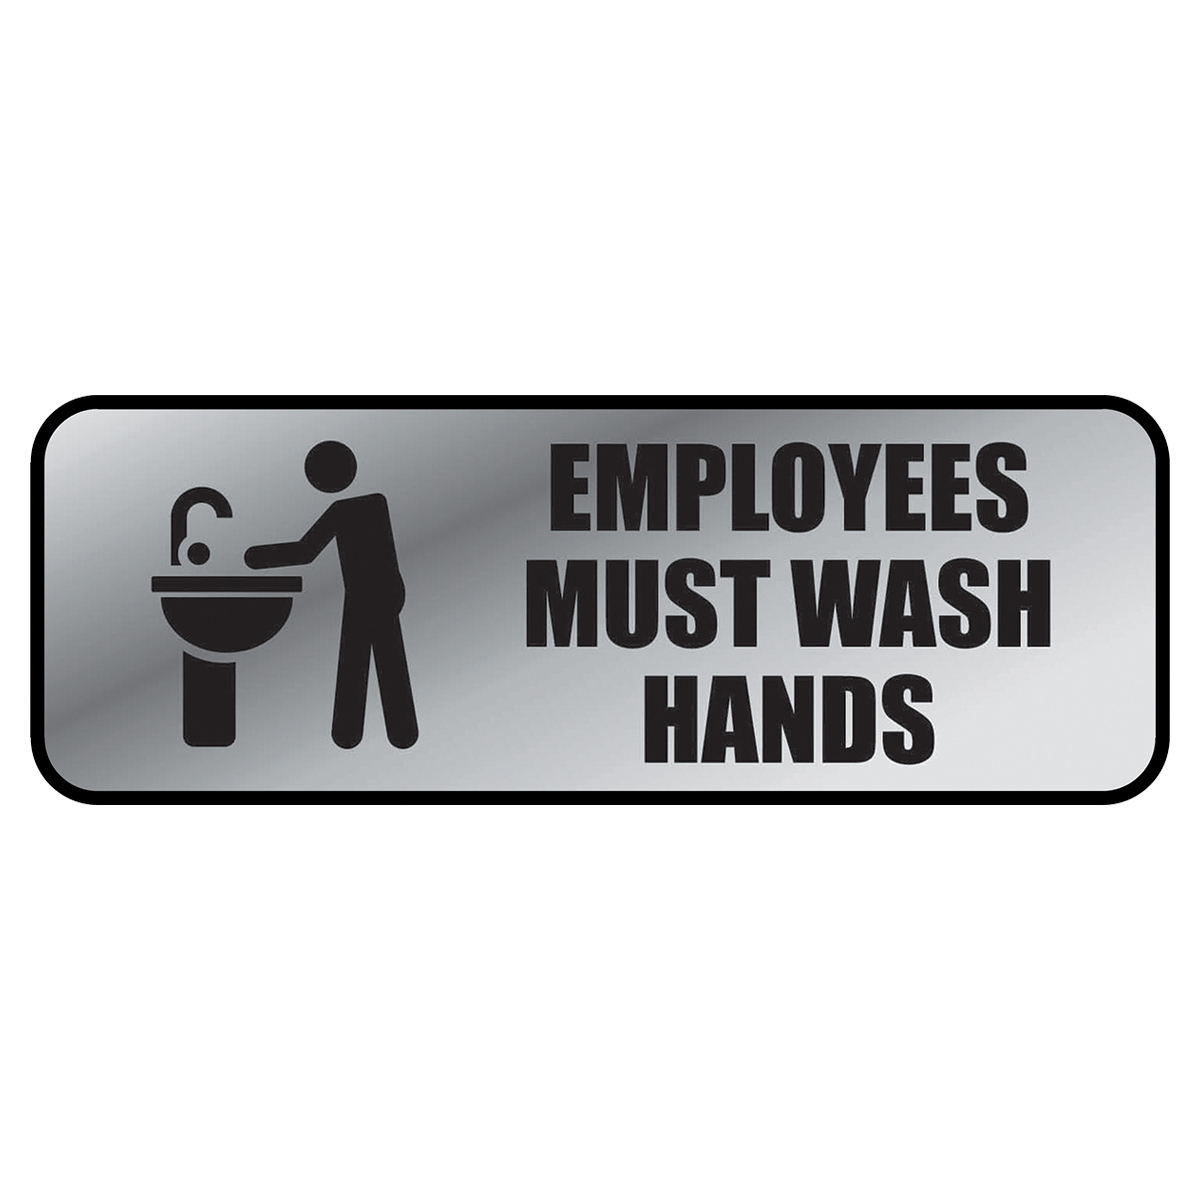 EMPLOYEES MUST WASH HANDS - Metal Sign - 098205